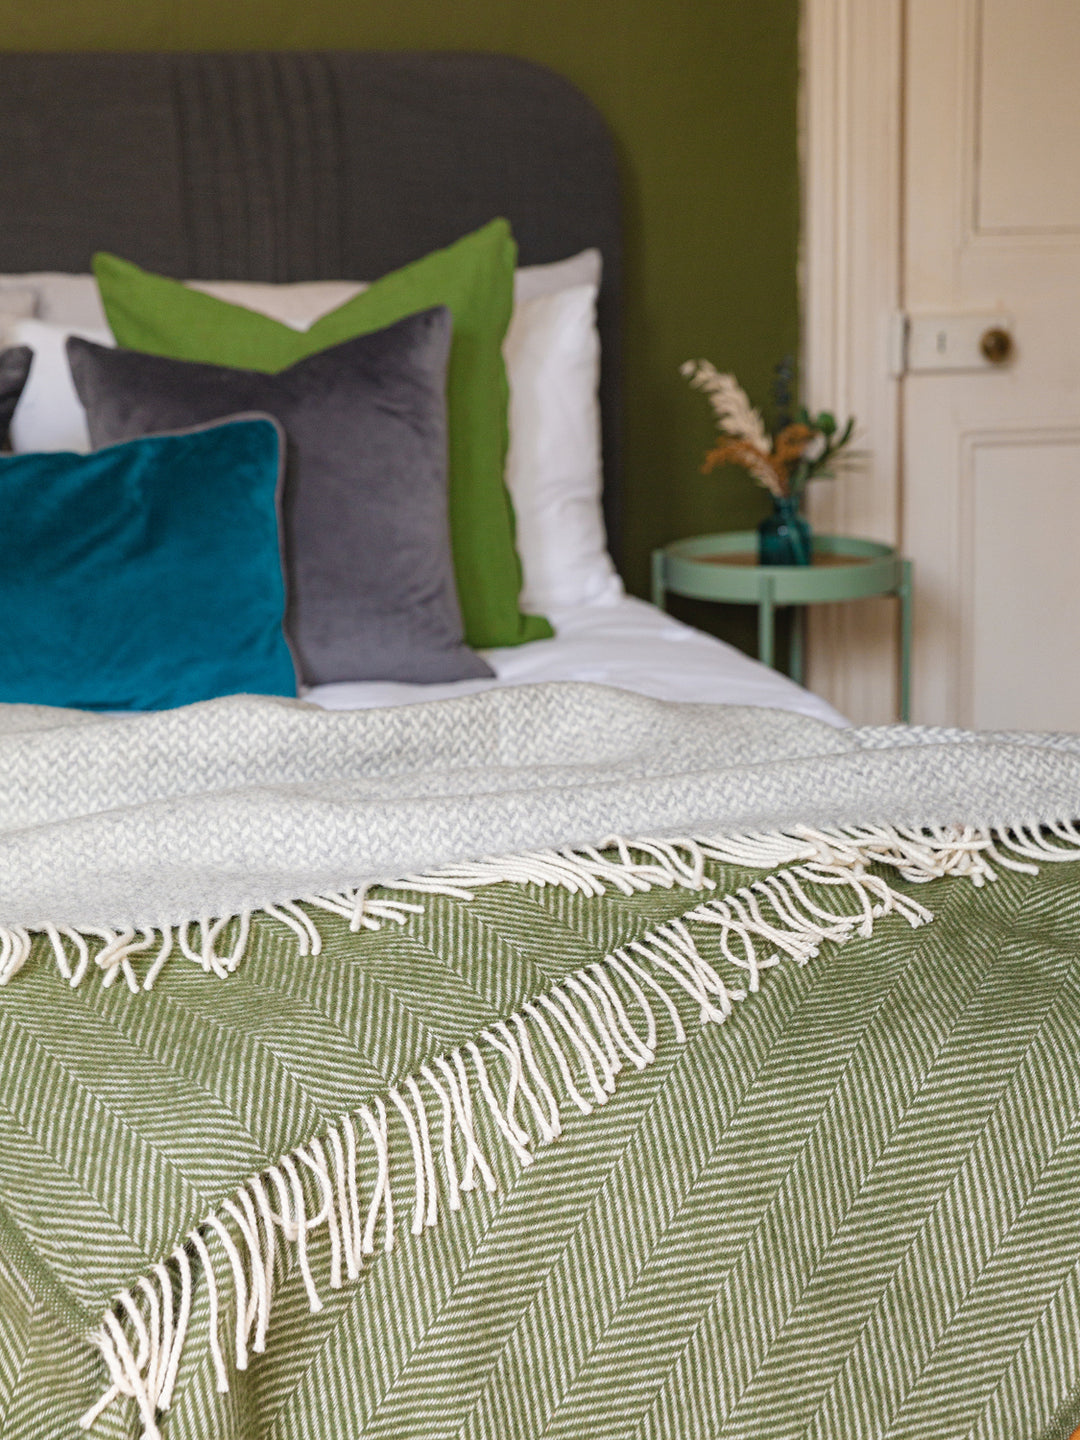 A green wool throw spread on a bed